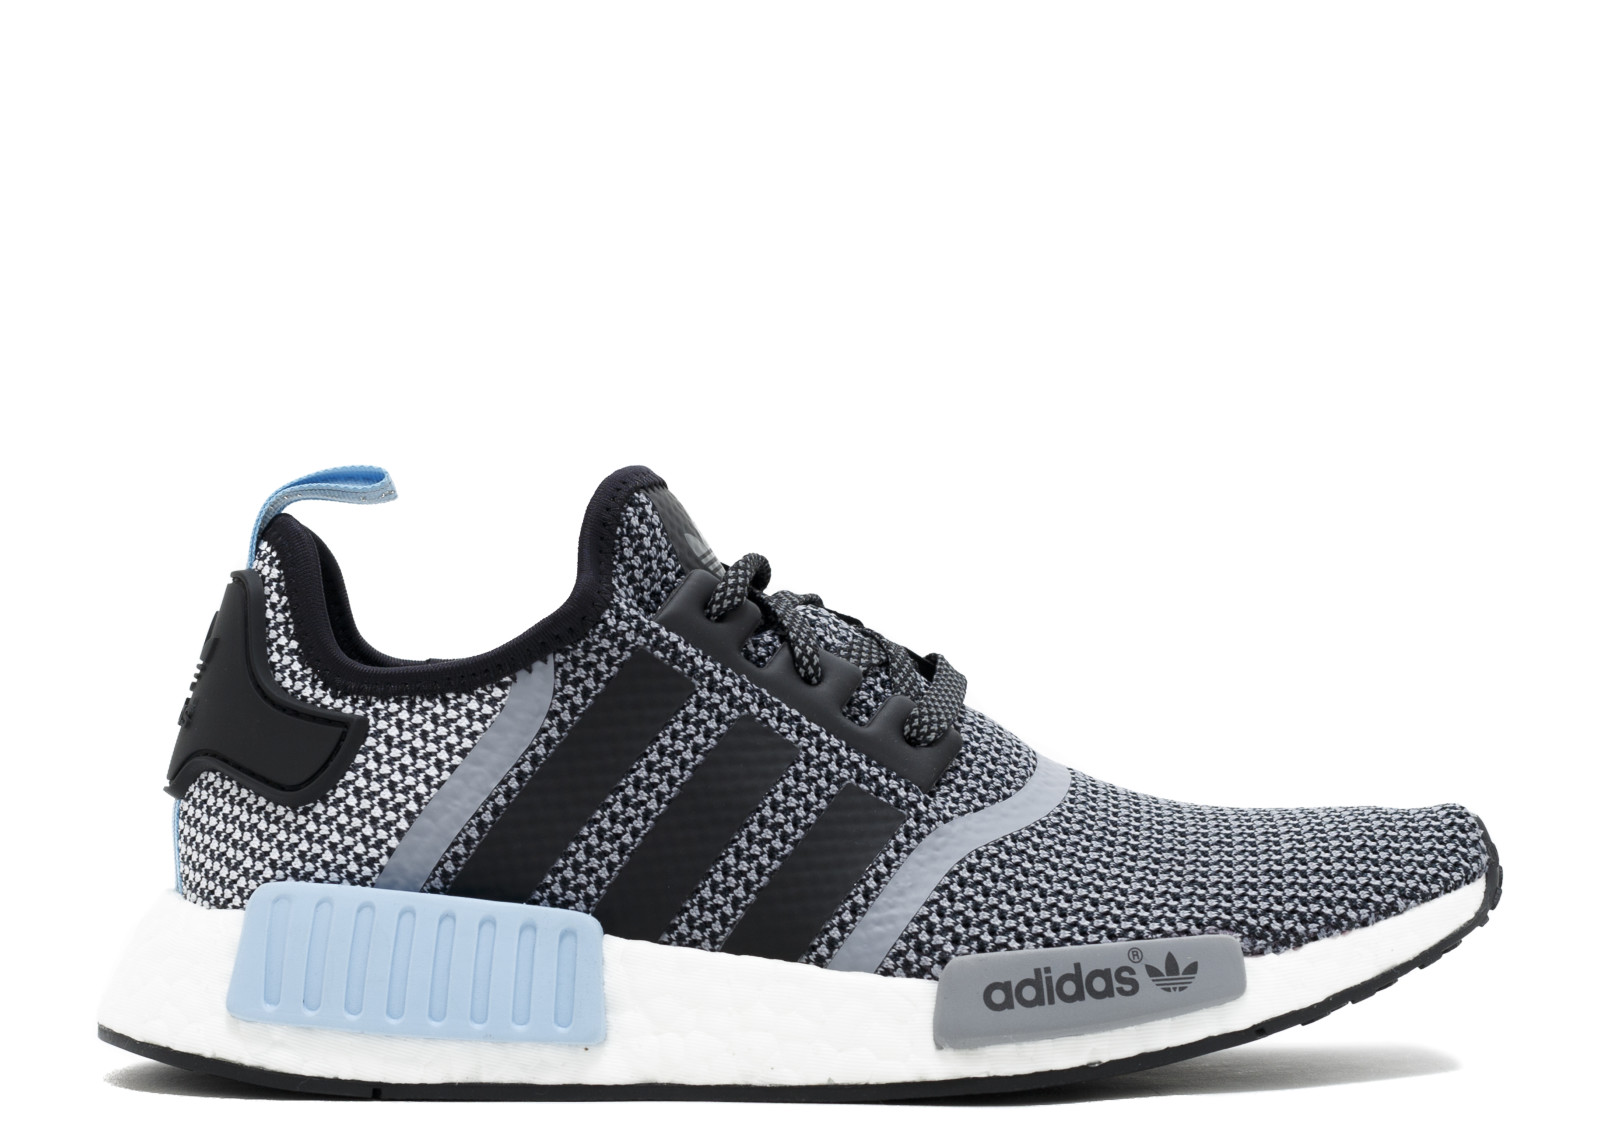 Adidas NMD R1 BLUE — the curated goods